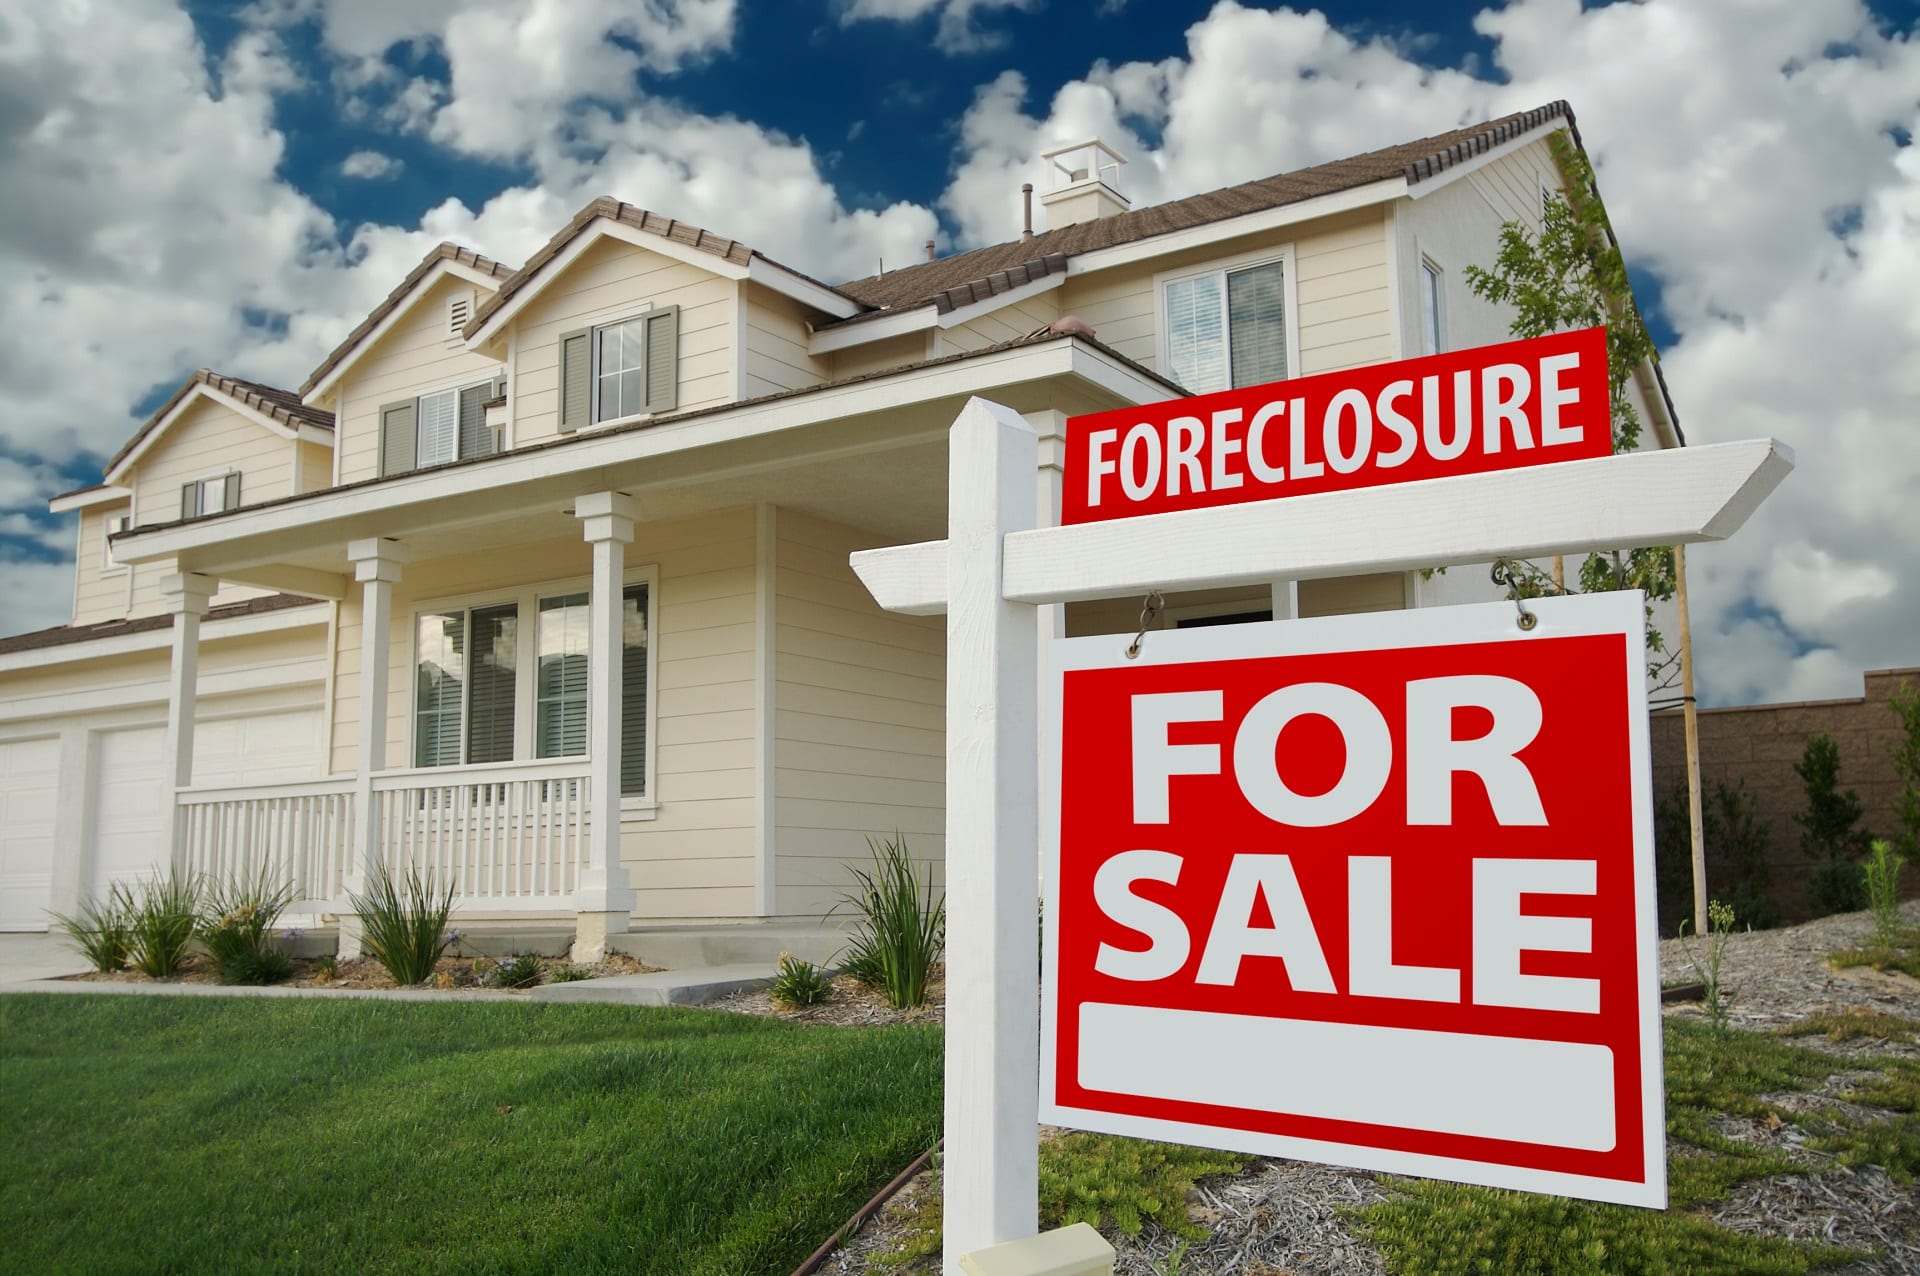 Facing Foreclosure in Southern Washington: What Are Homeowners’ Rights and Available Legal Remedies? Image